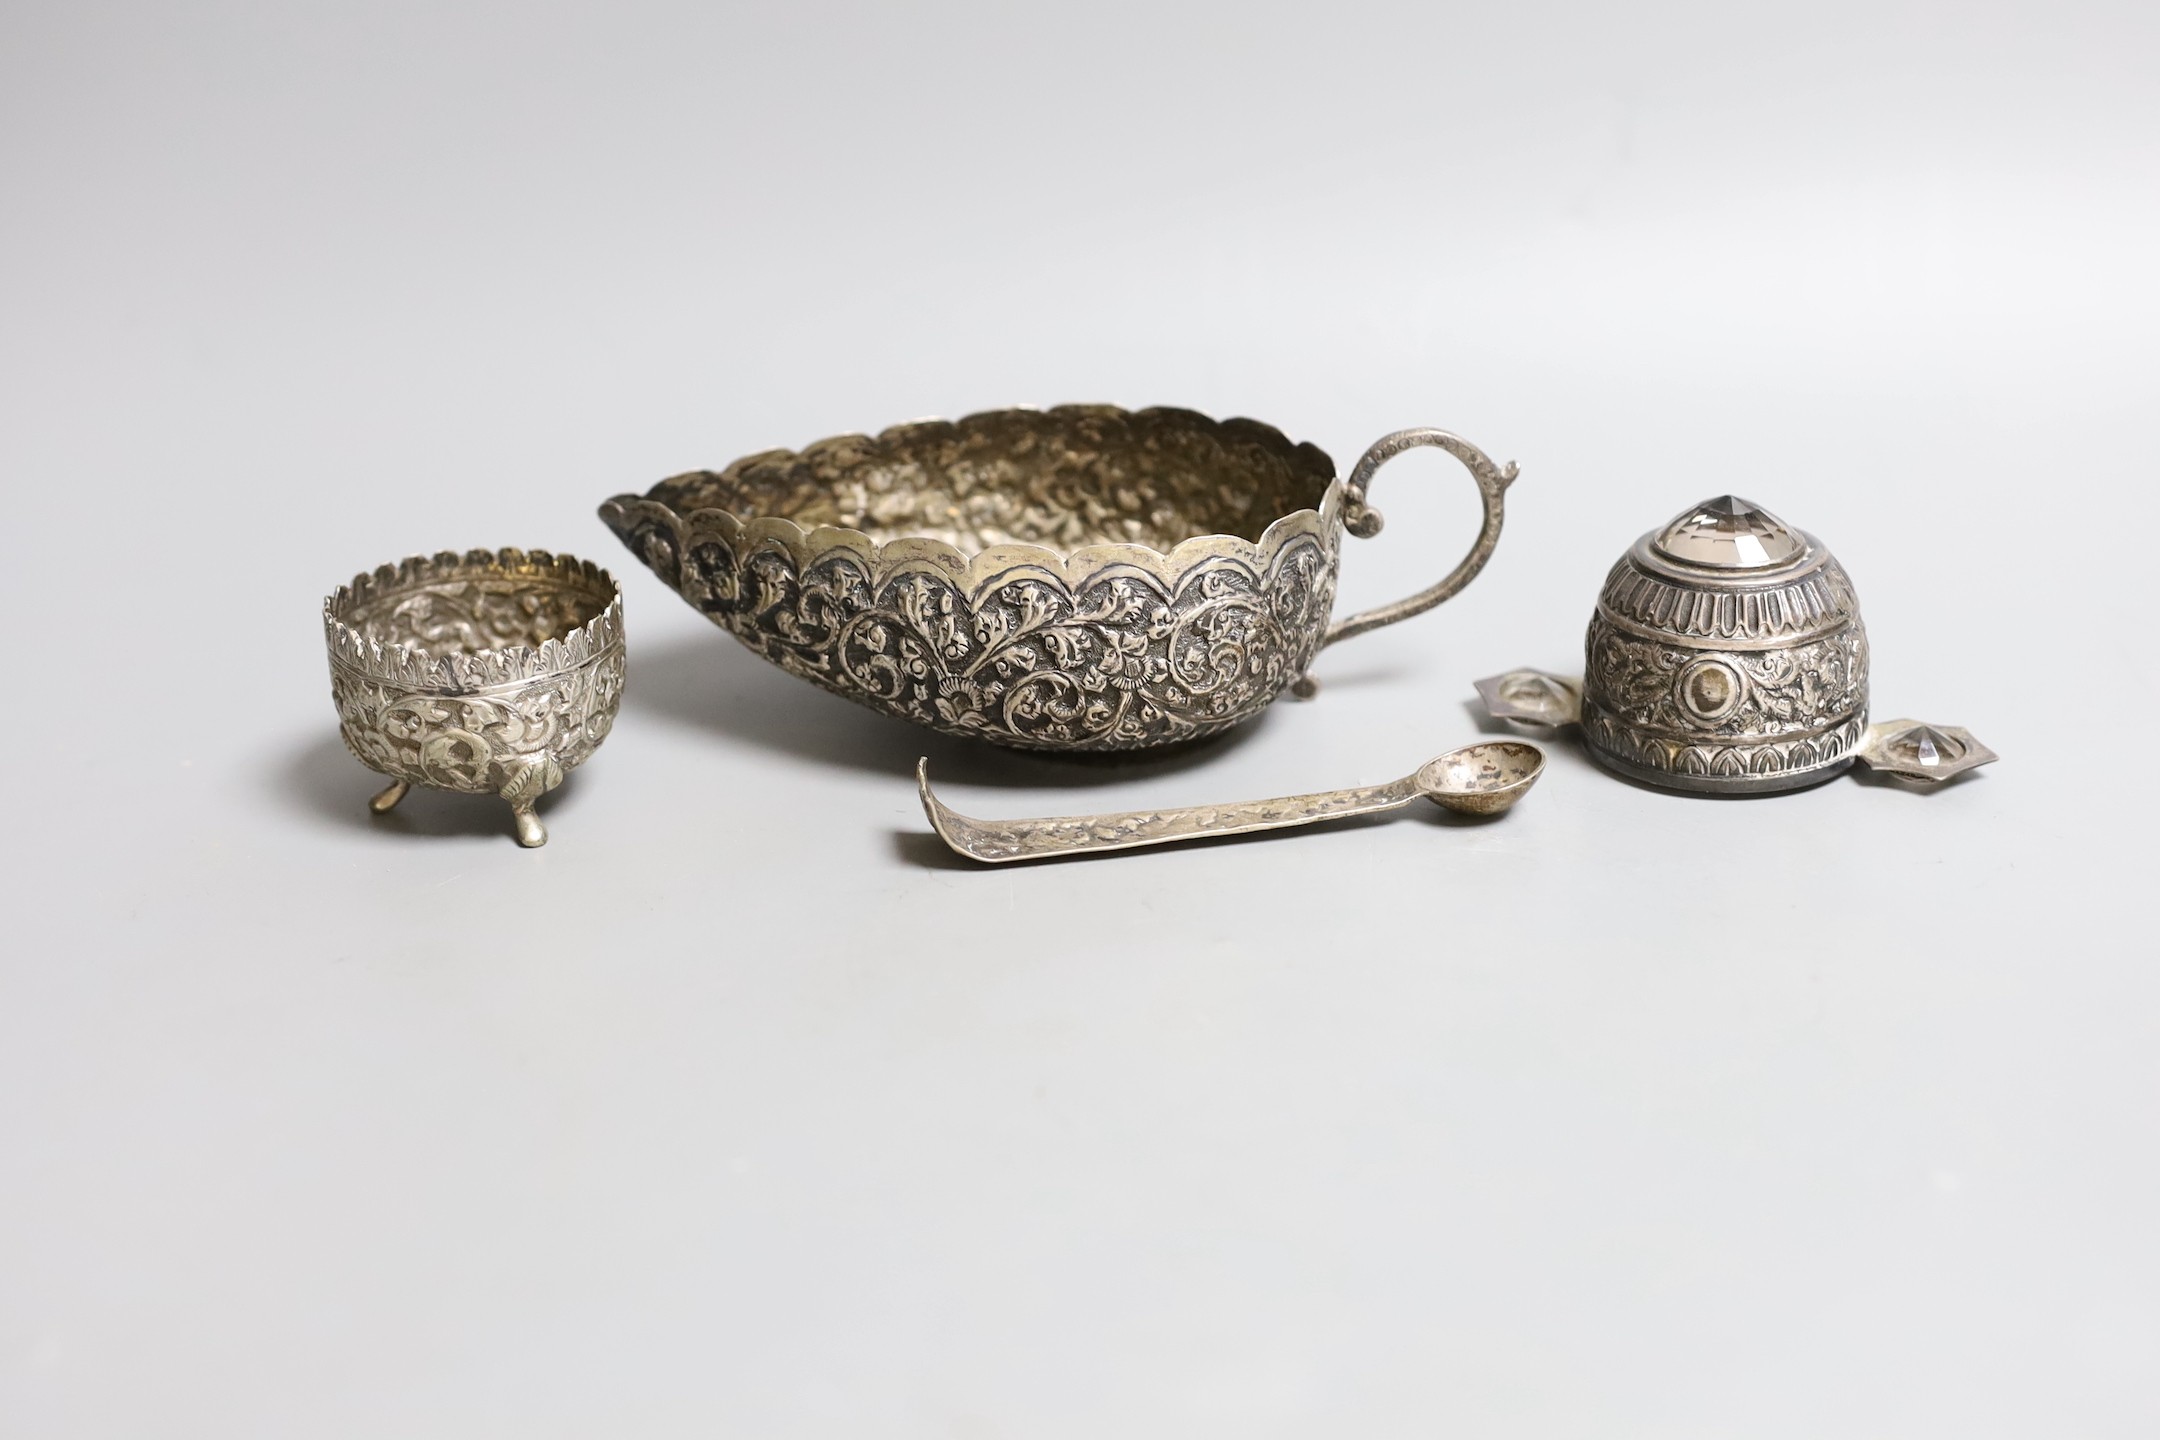 An Indian white metal gem set tasting cup, diameter 87mm, a sauce boat, salt and part of a pair of tongs (a.f.).